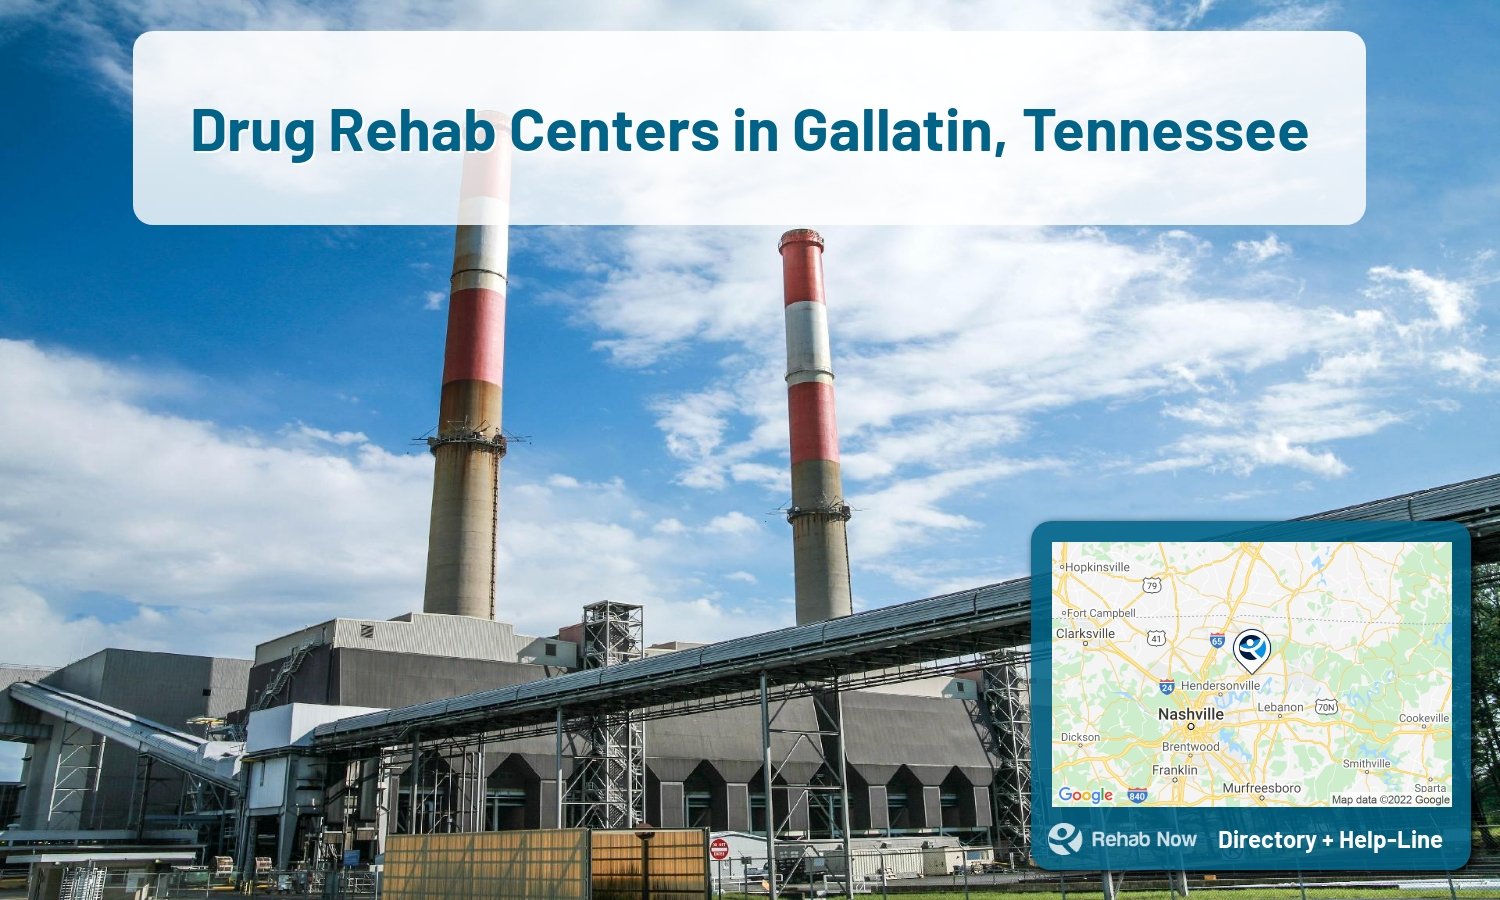 Gallatin, TN Treatment Centers. Find drug rehab in Gallatin, Tennessee, or detox and treatment programs. Get the right help now!